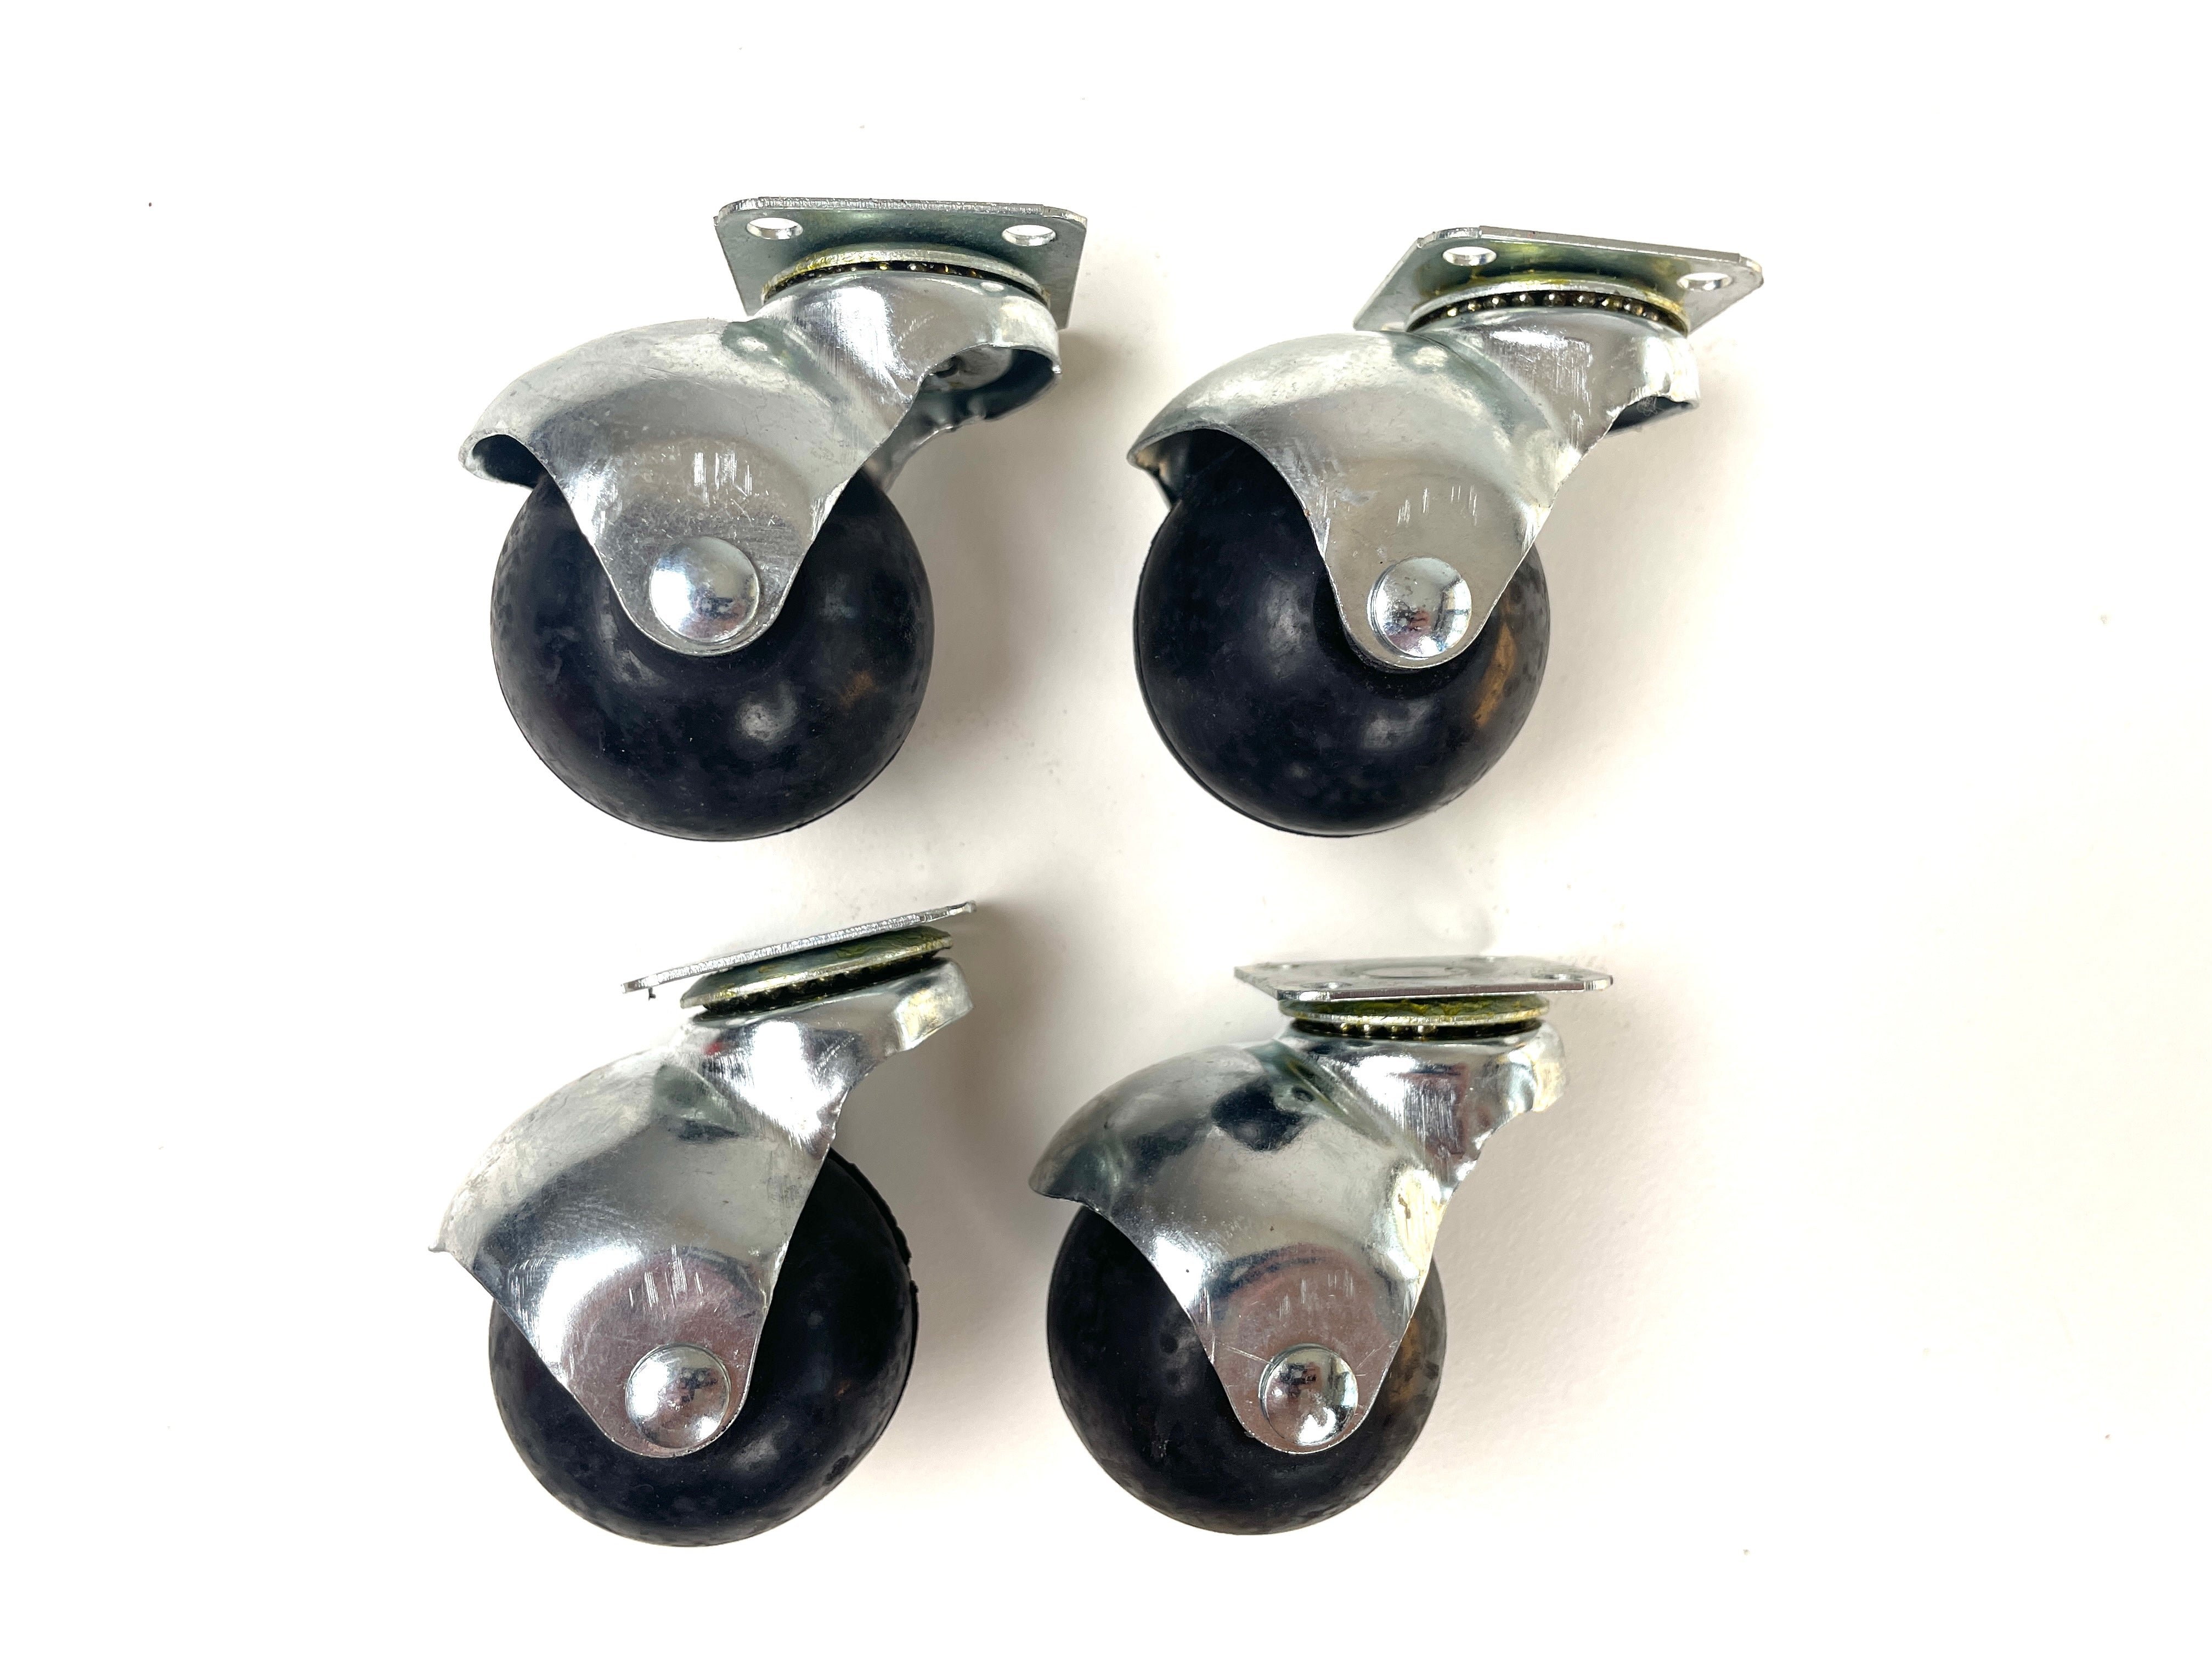 Vintage style rubber ball casters/ furniture wheels